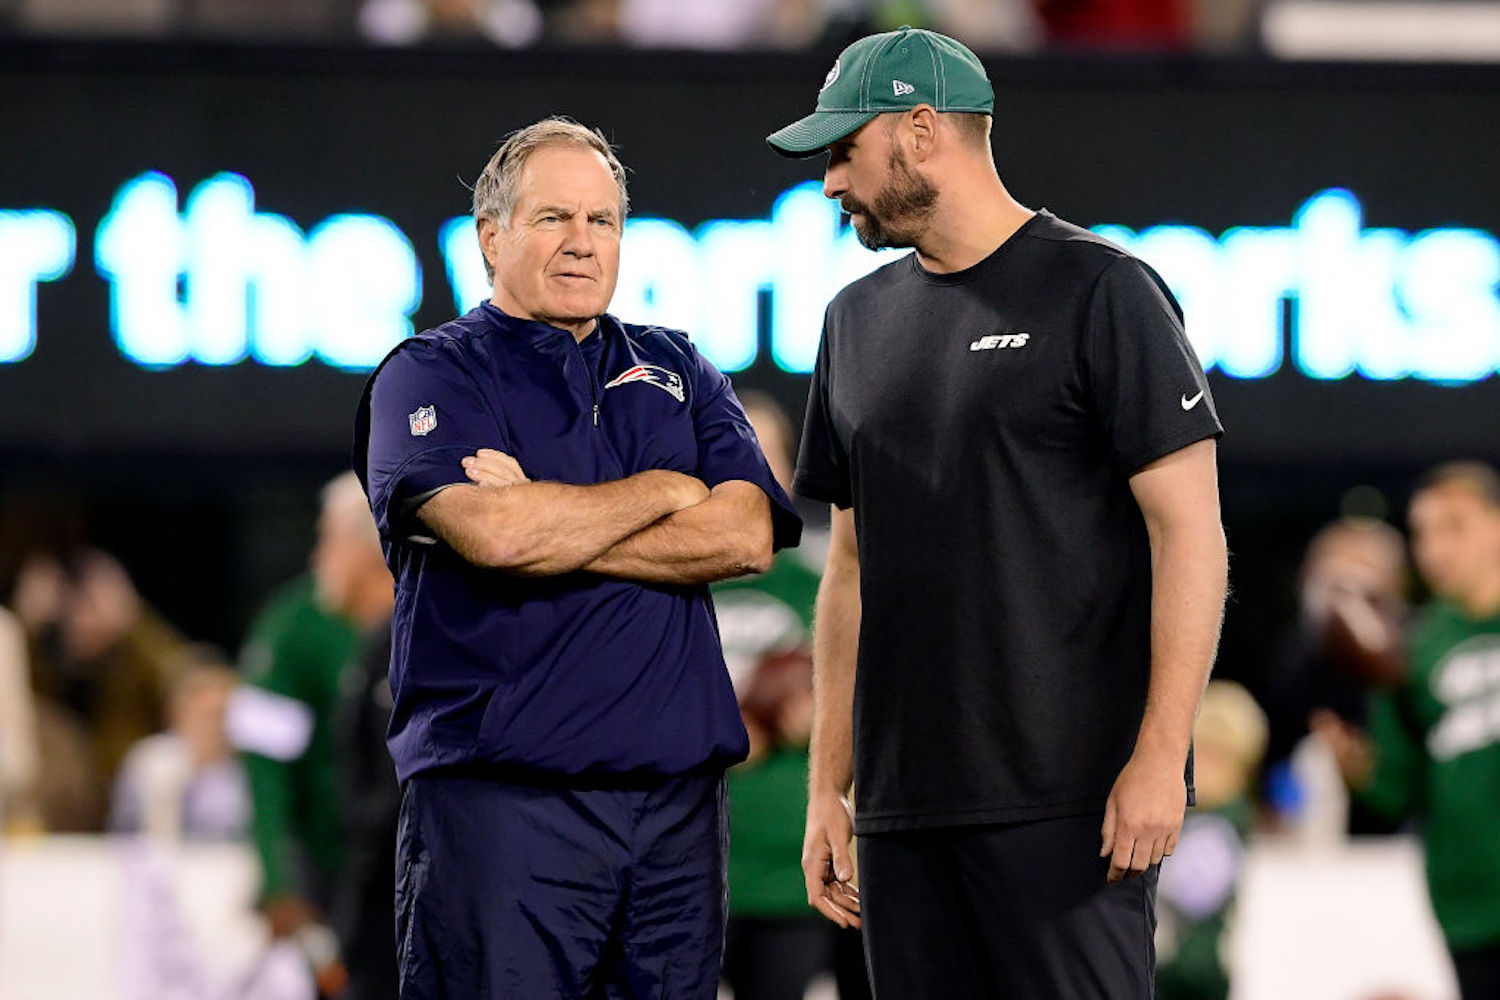 Bill Belichick Sends Puzzling Compliment to Adam Gase About His Coaching Abilities